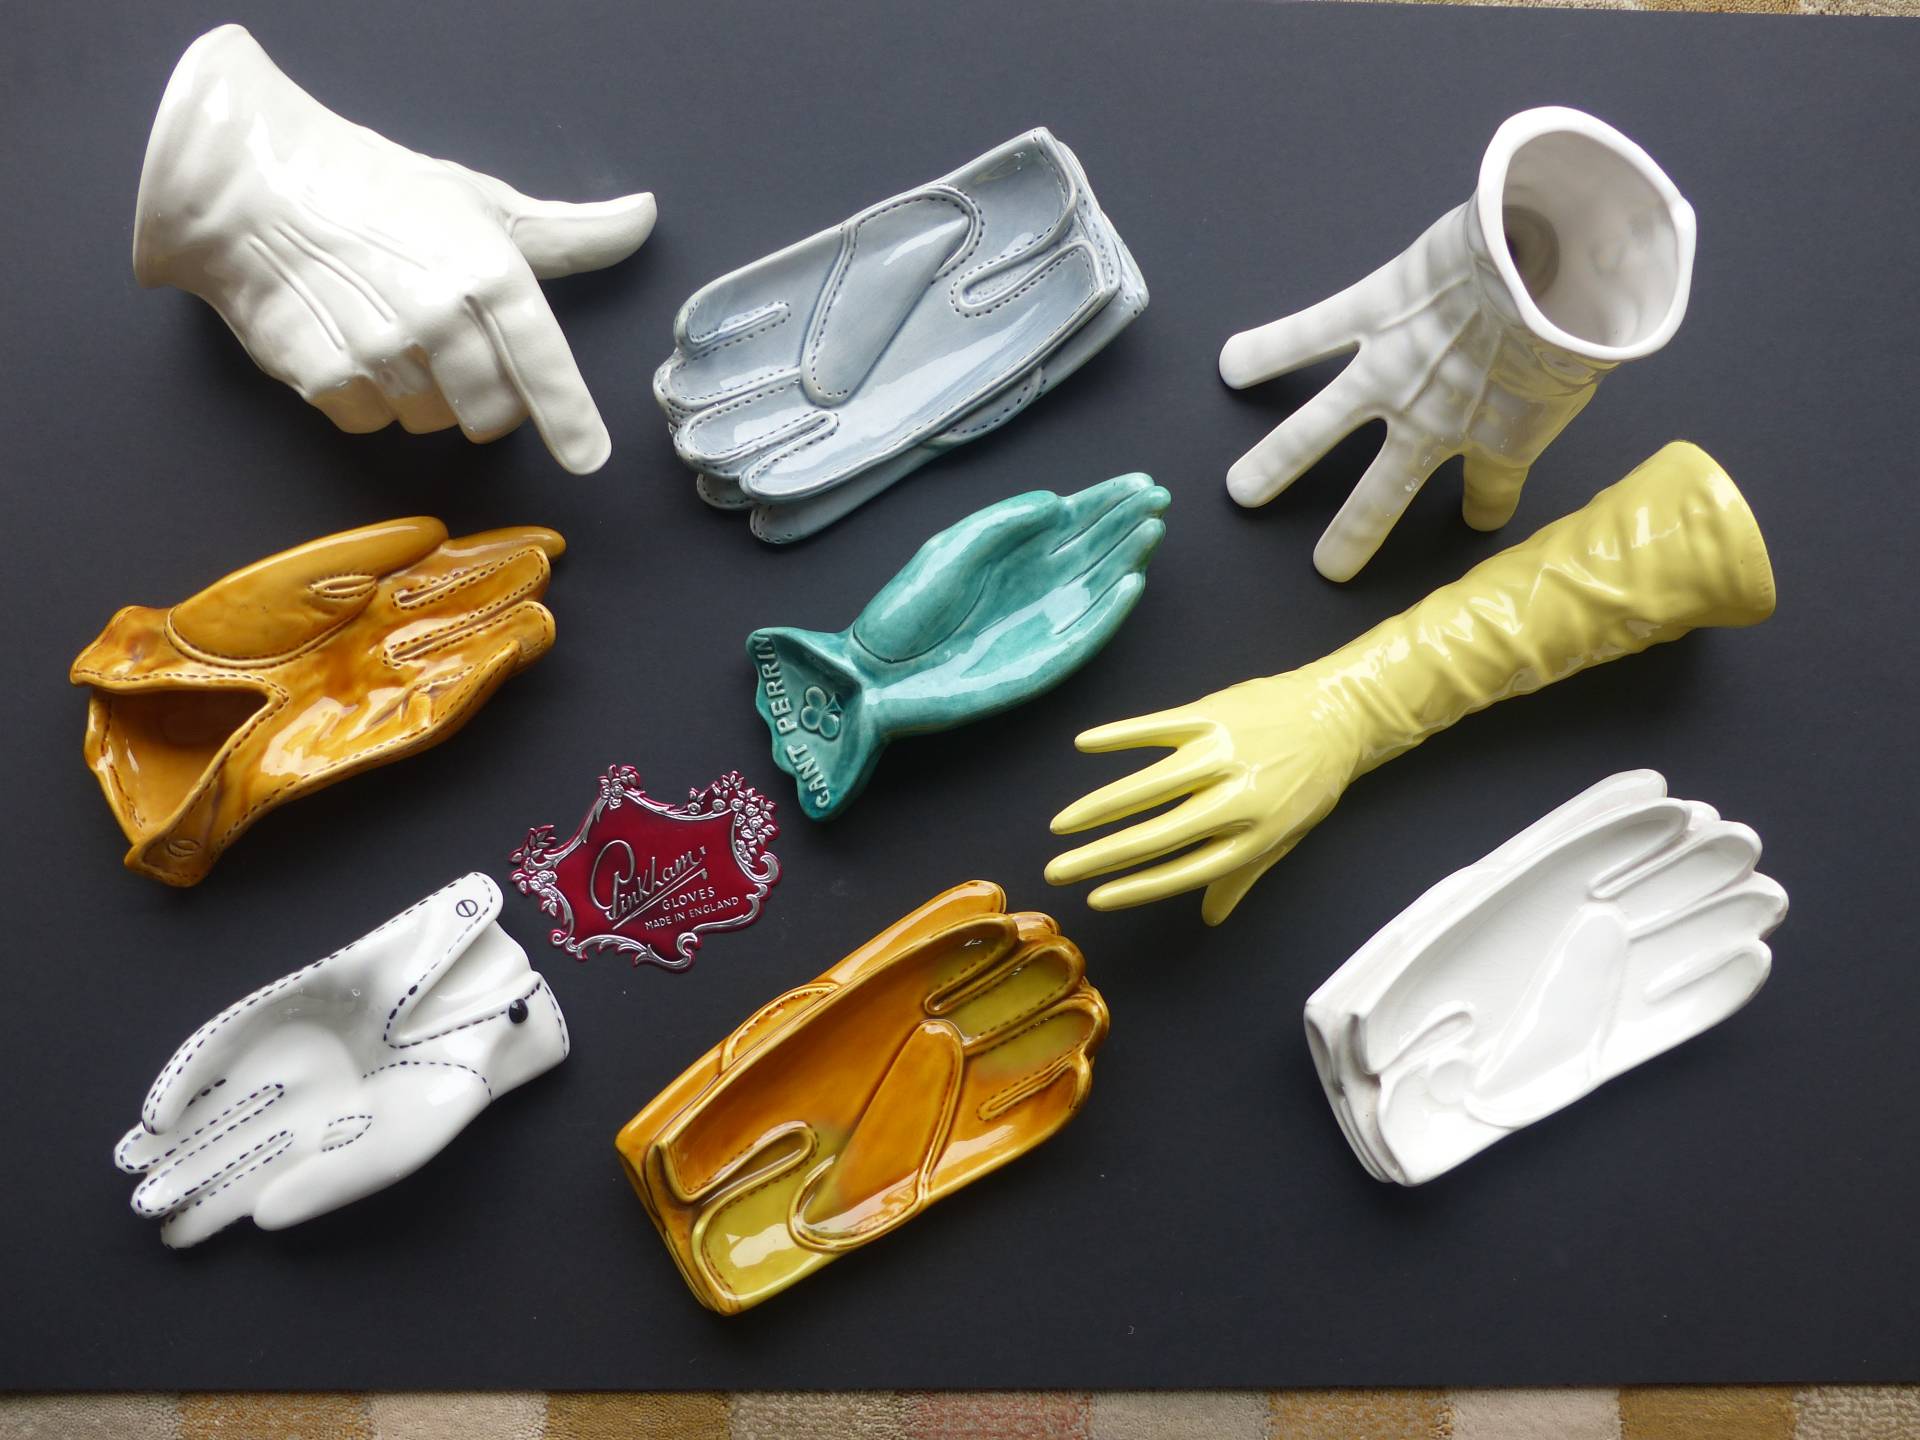 Lots of china gloves